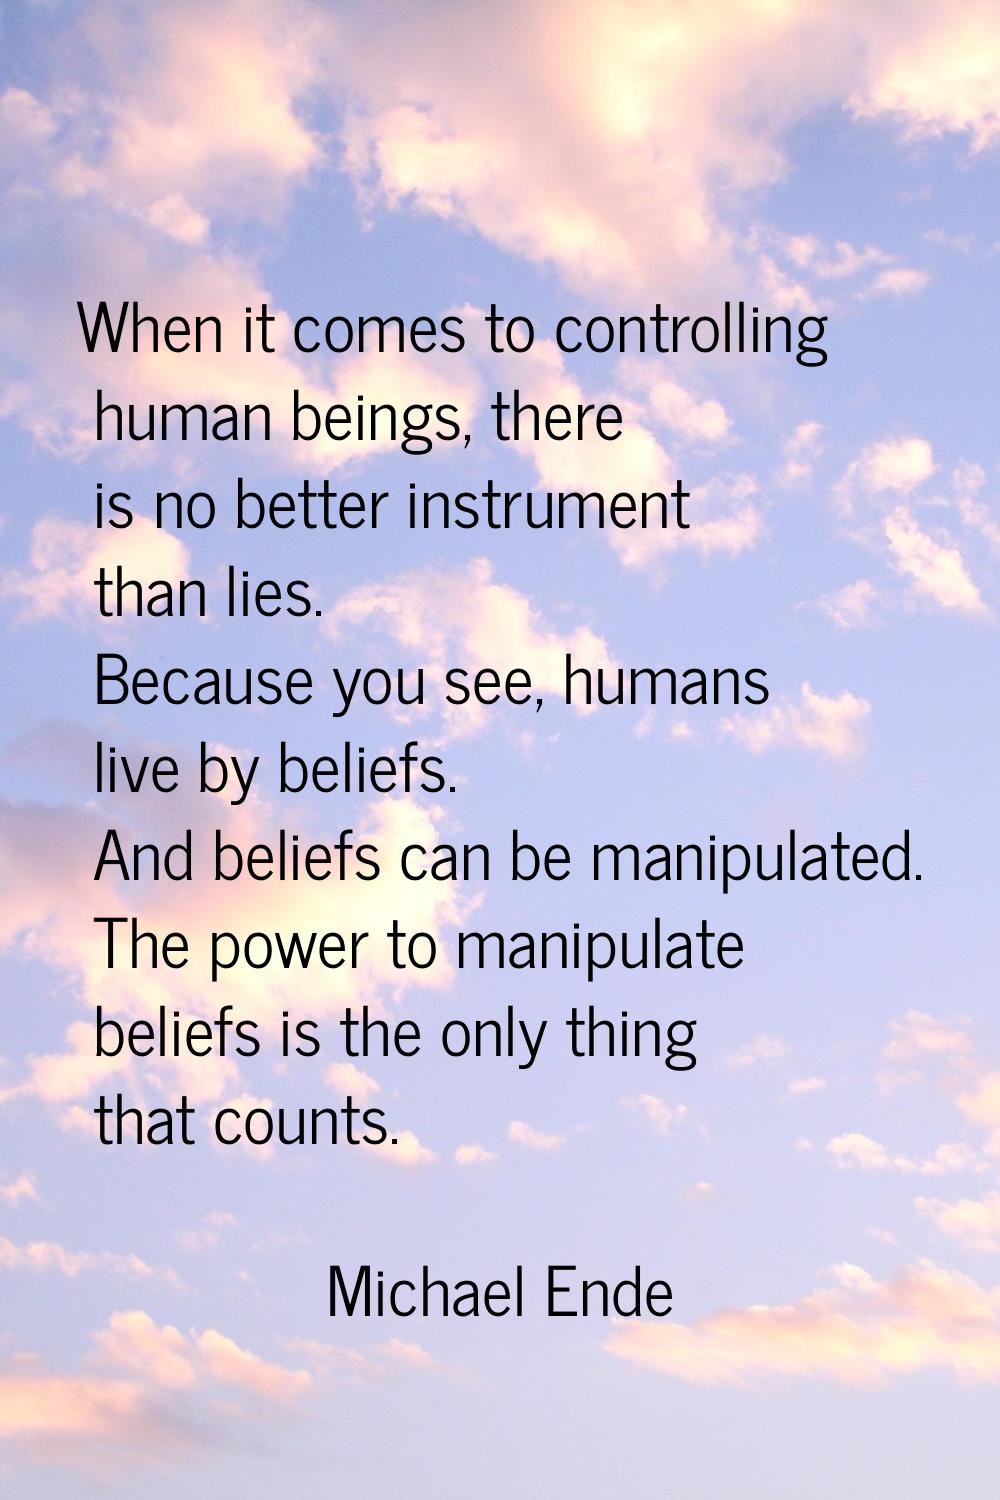 When it comes to controlling human beings, there is no better instrument than lies. Because you see